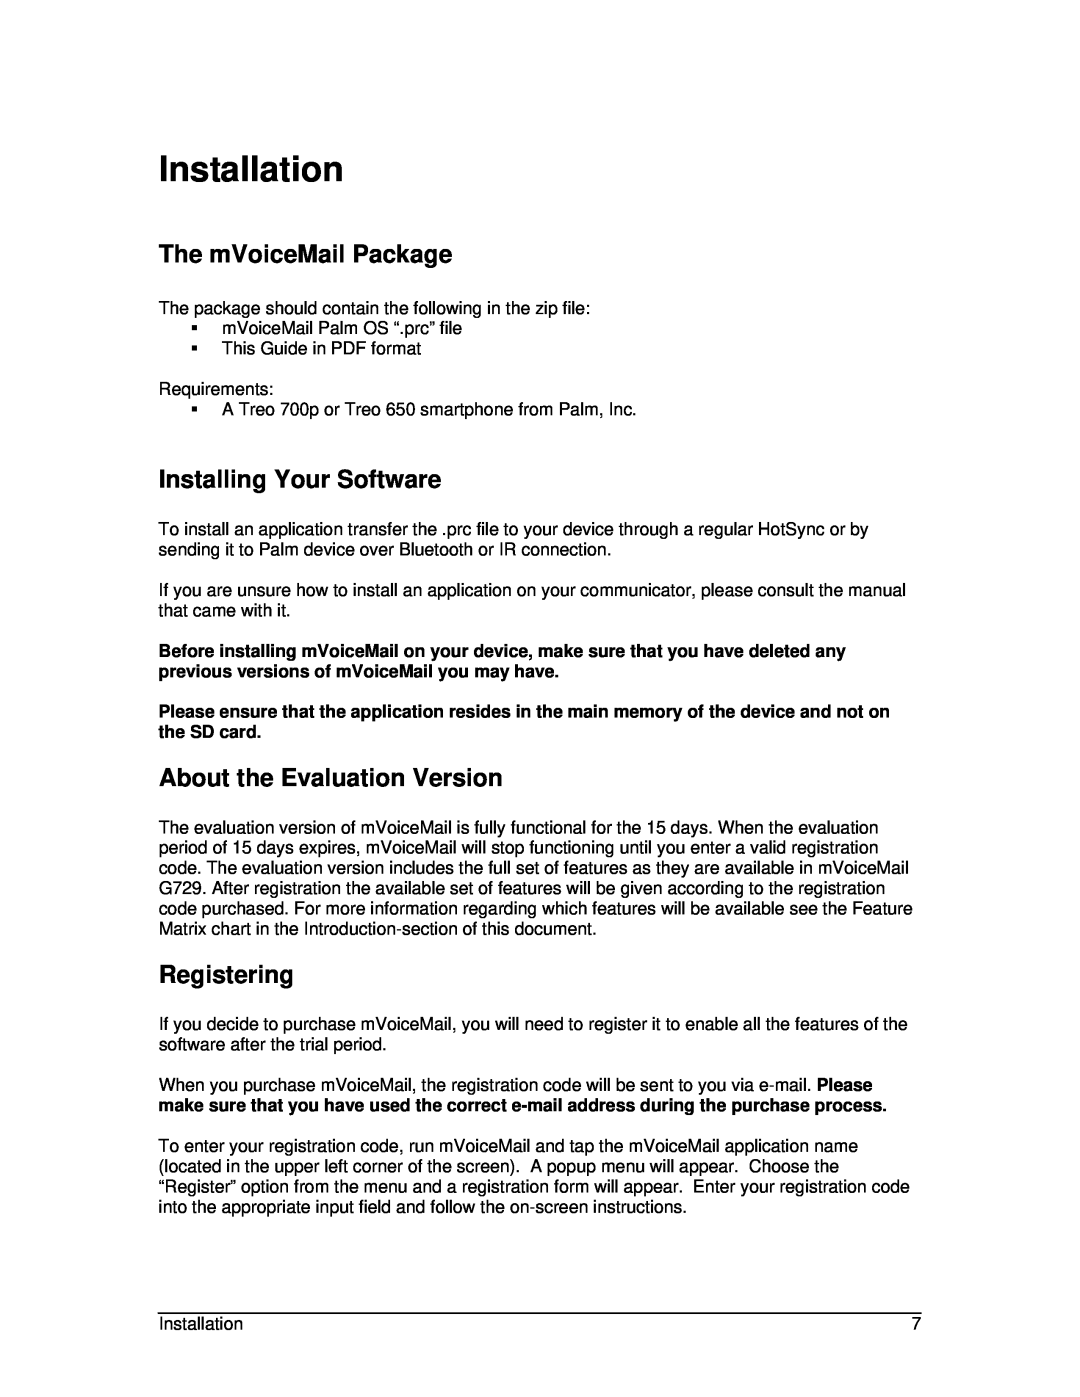 Motorola motorola user manual Installation, The mVoiceMail Package, Installing Your Software, About the Evaluation Version 